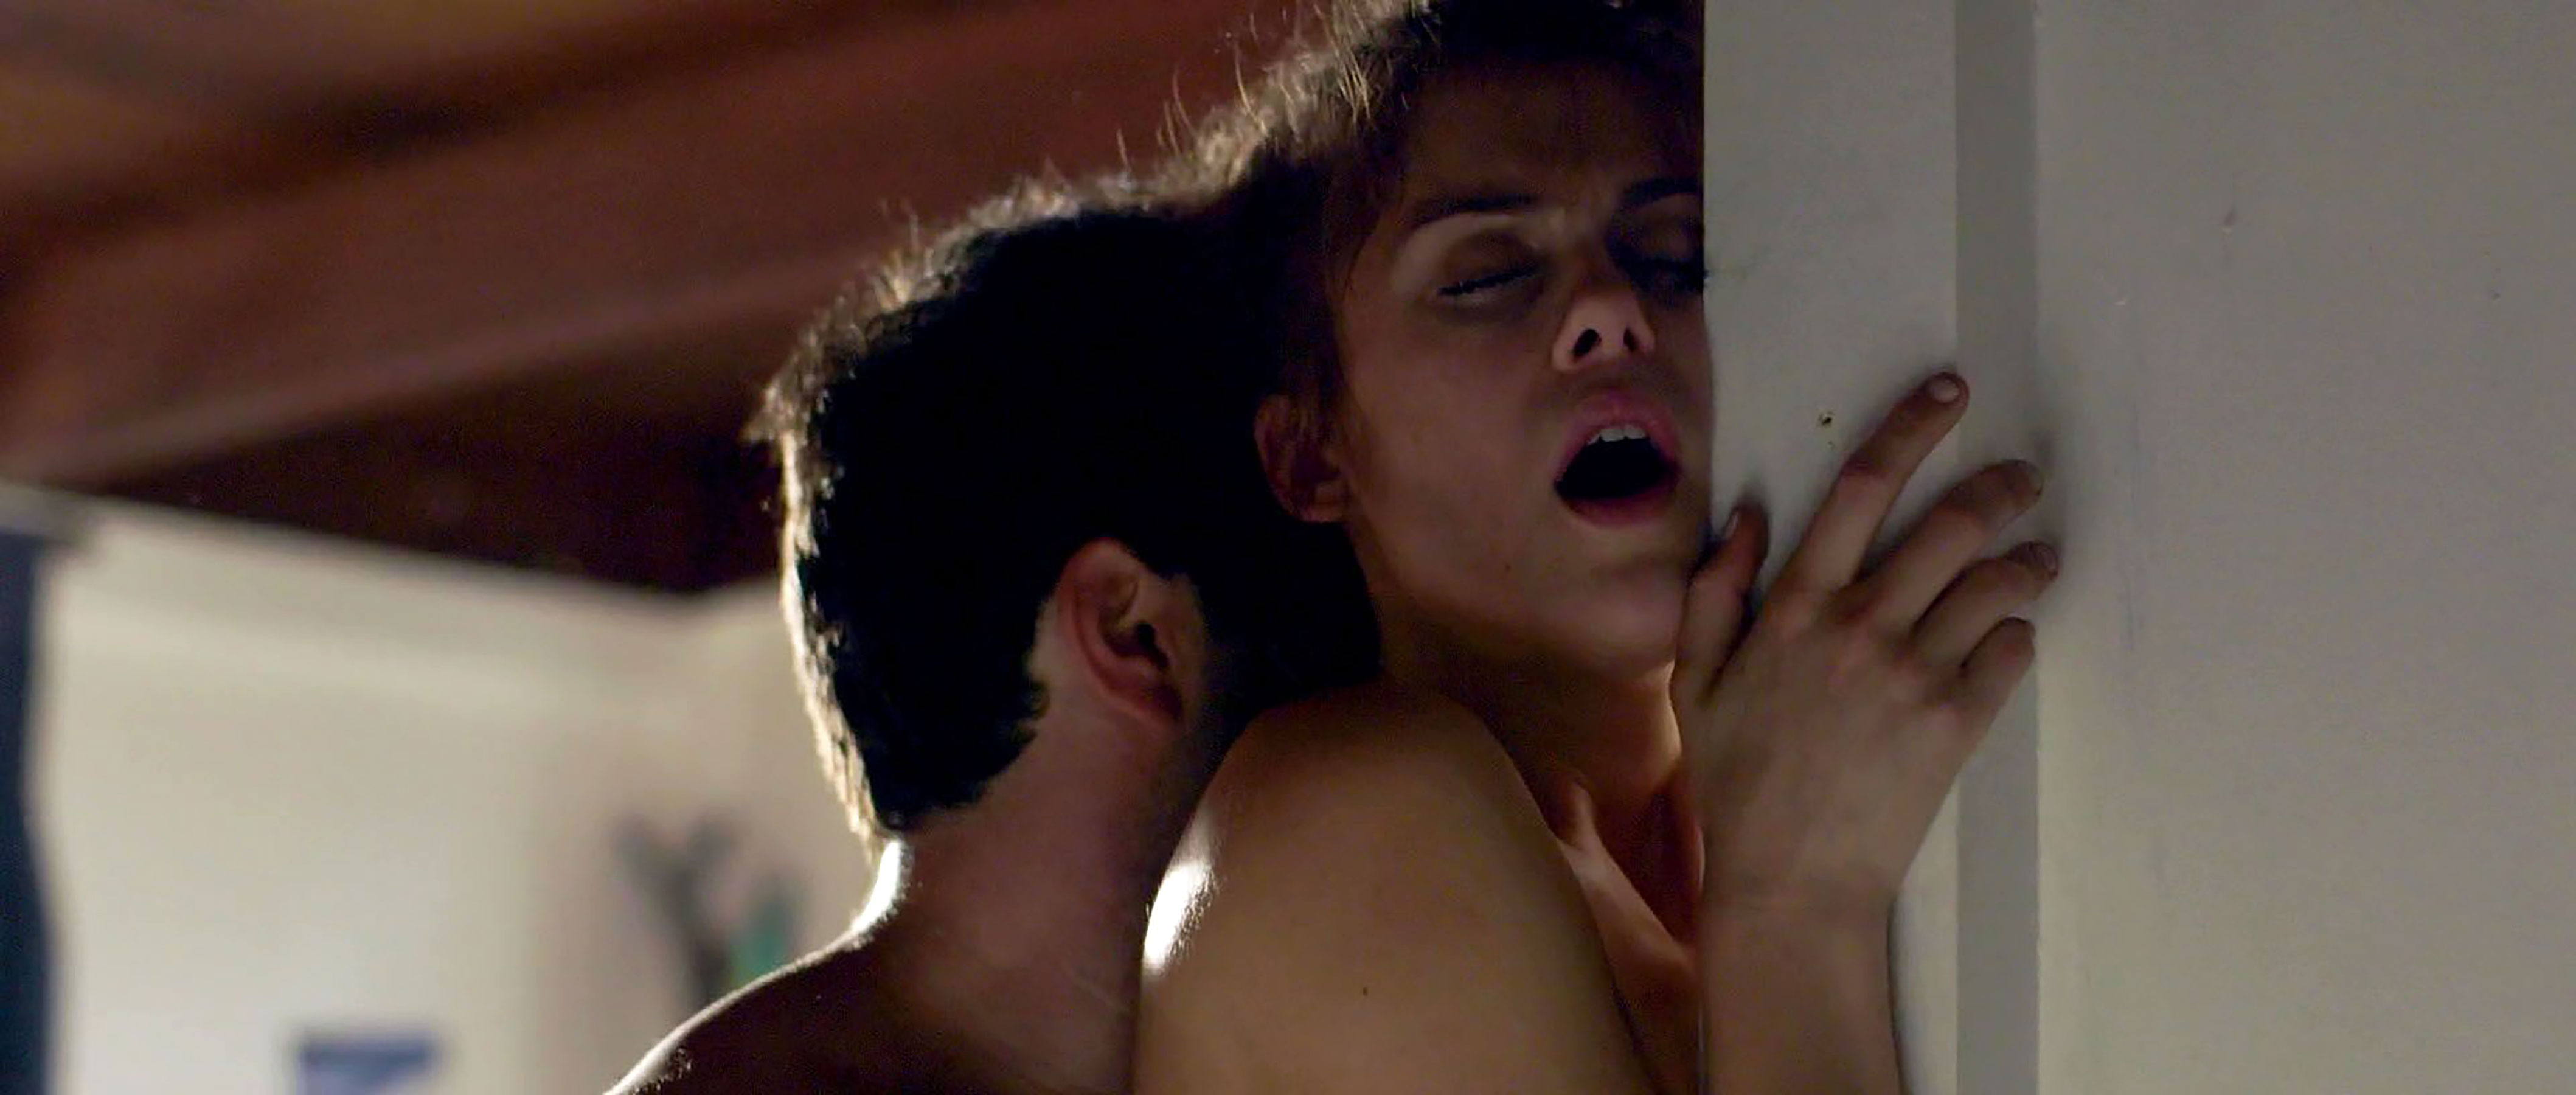 Lindsey shaw sex tape